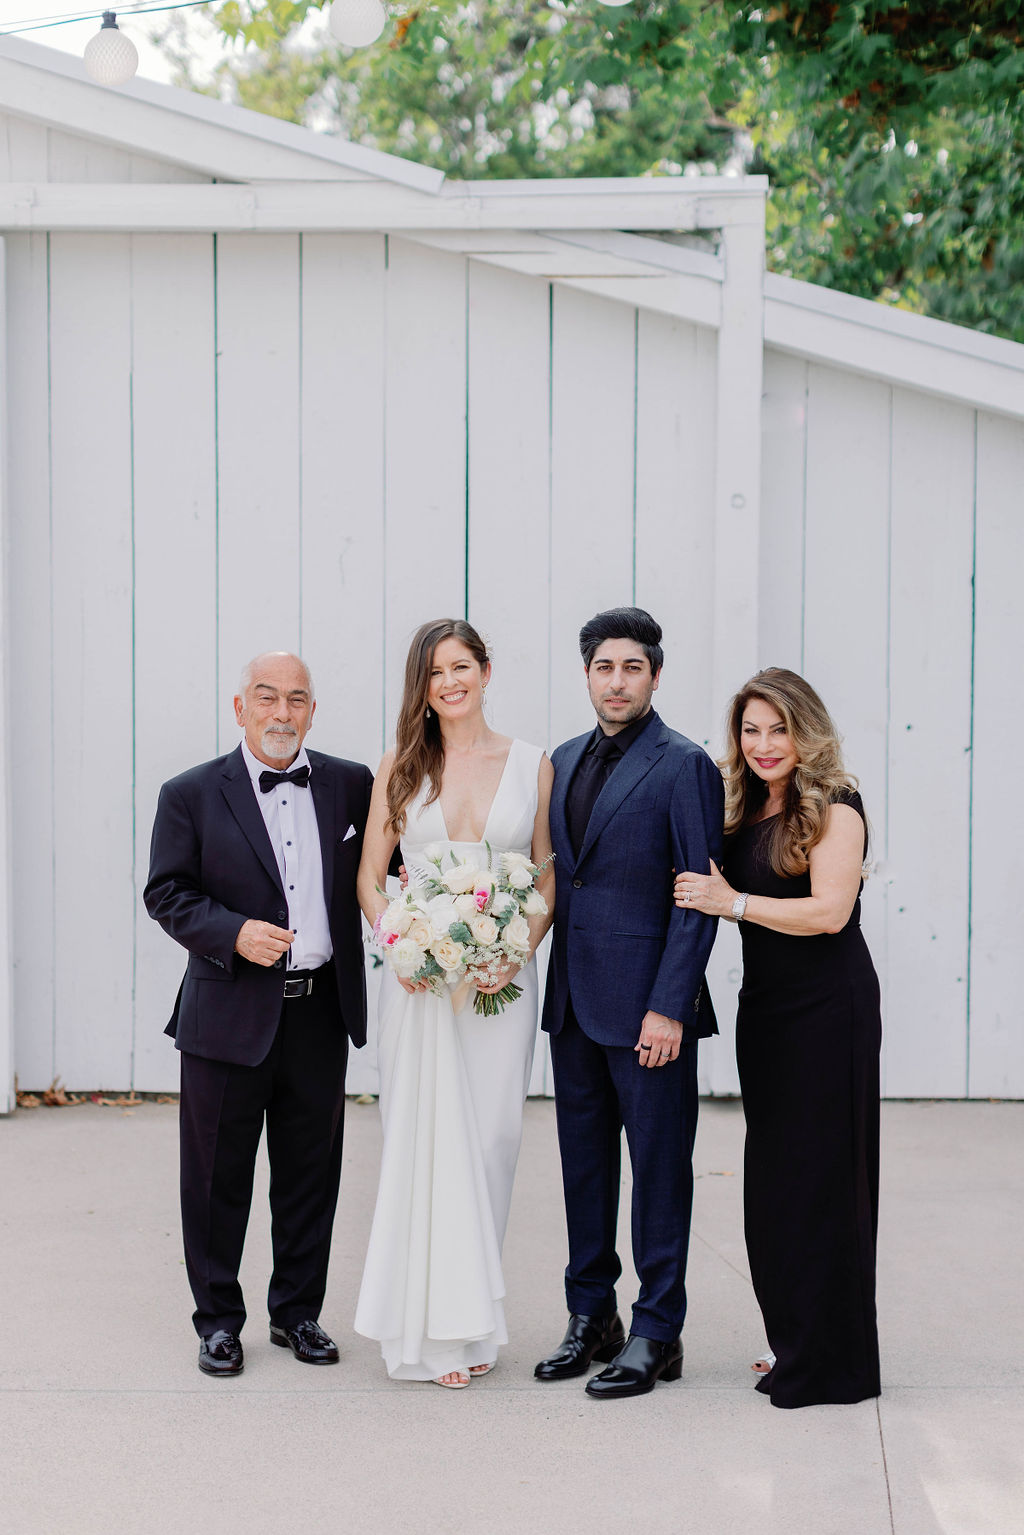 Family Portrait photo at Aliso Viejo Ranch wedding by Sarah Block Photography